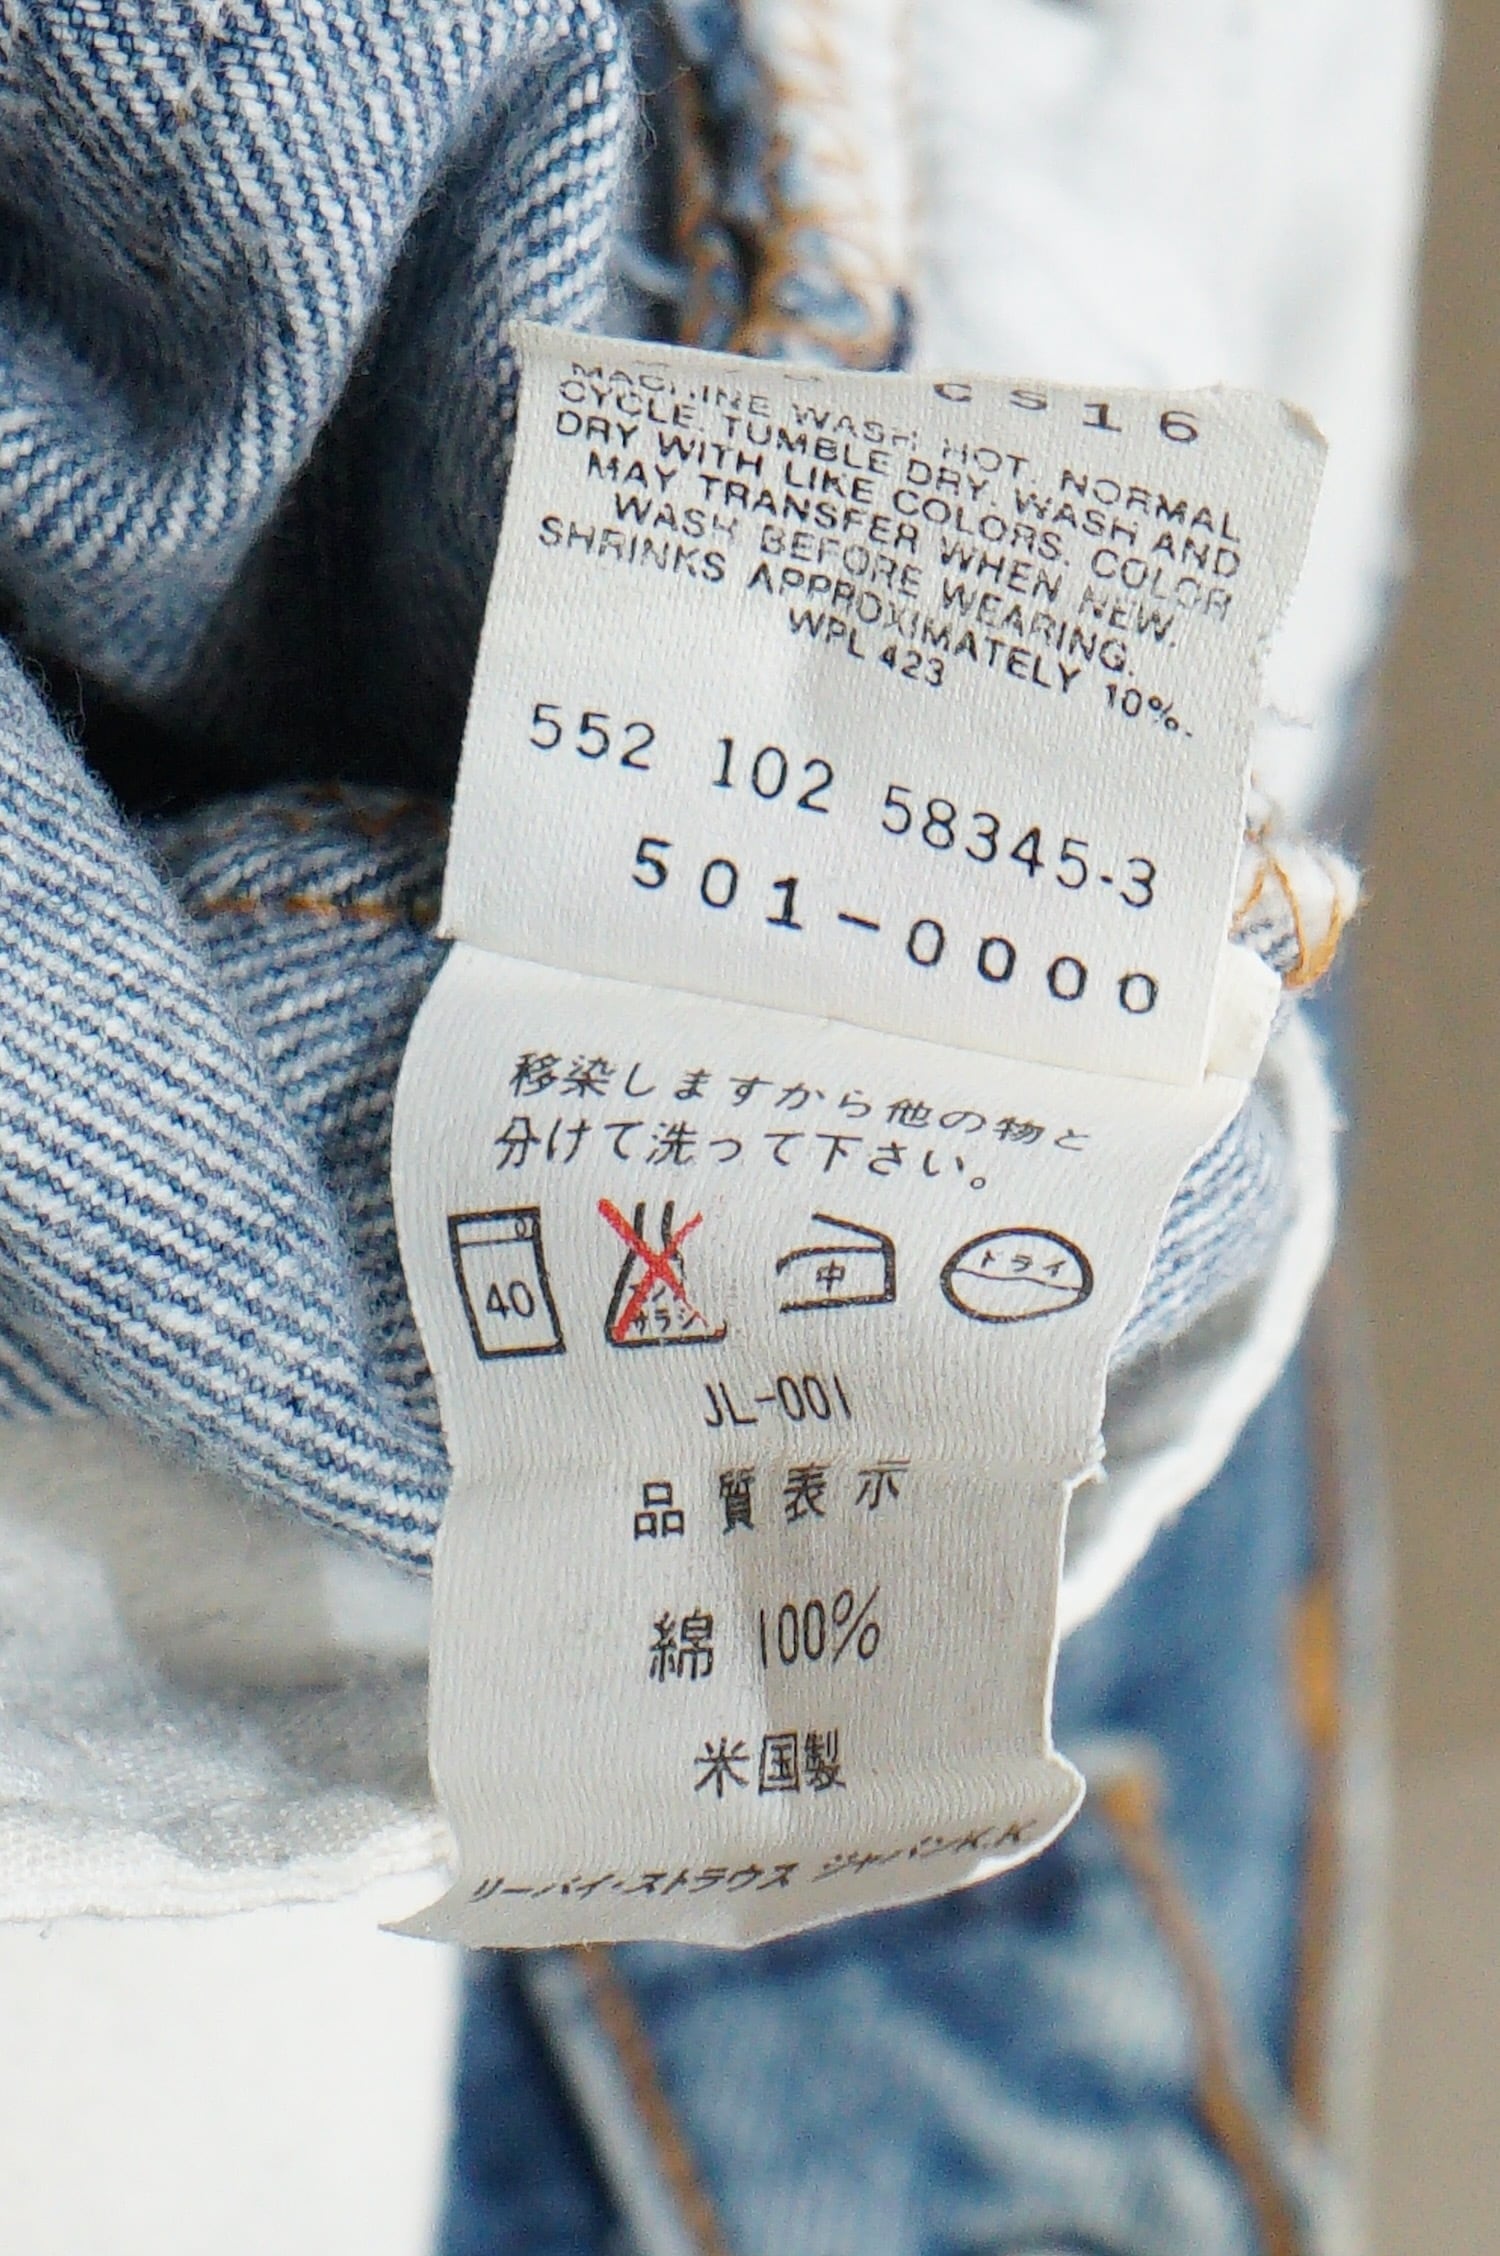 2787 Levi's リーバイス 501-0000 92年 米国製 Made in U.S.A. 赤文字 ...